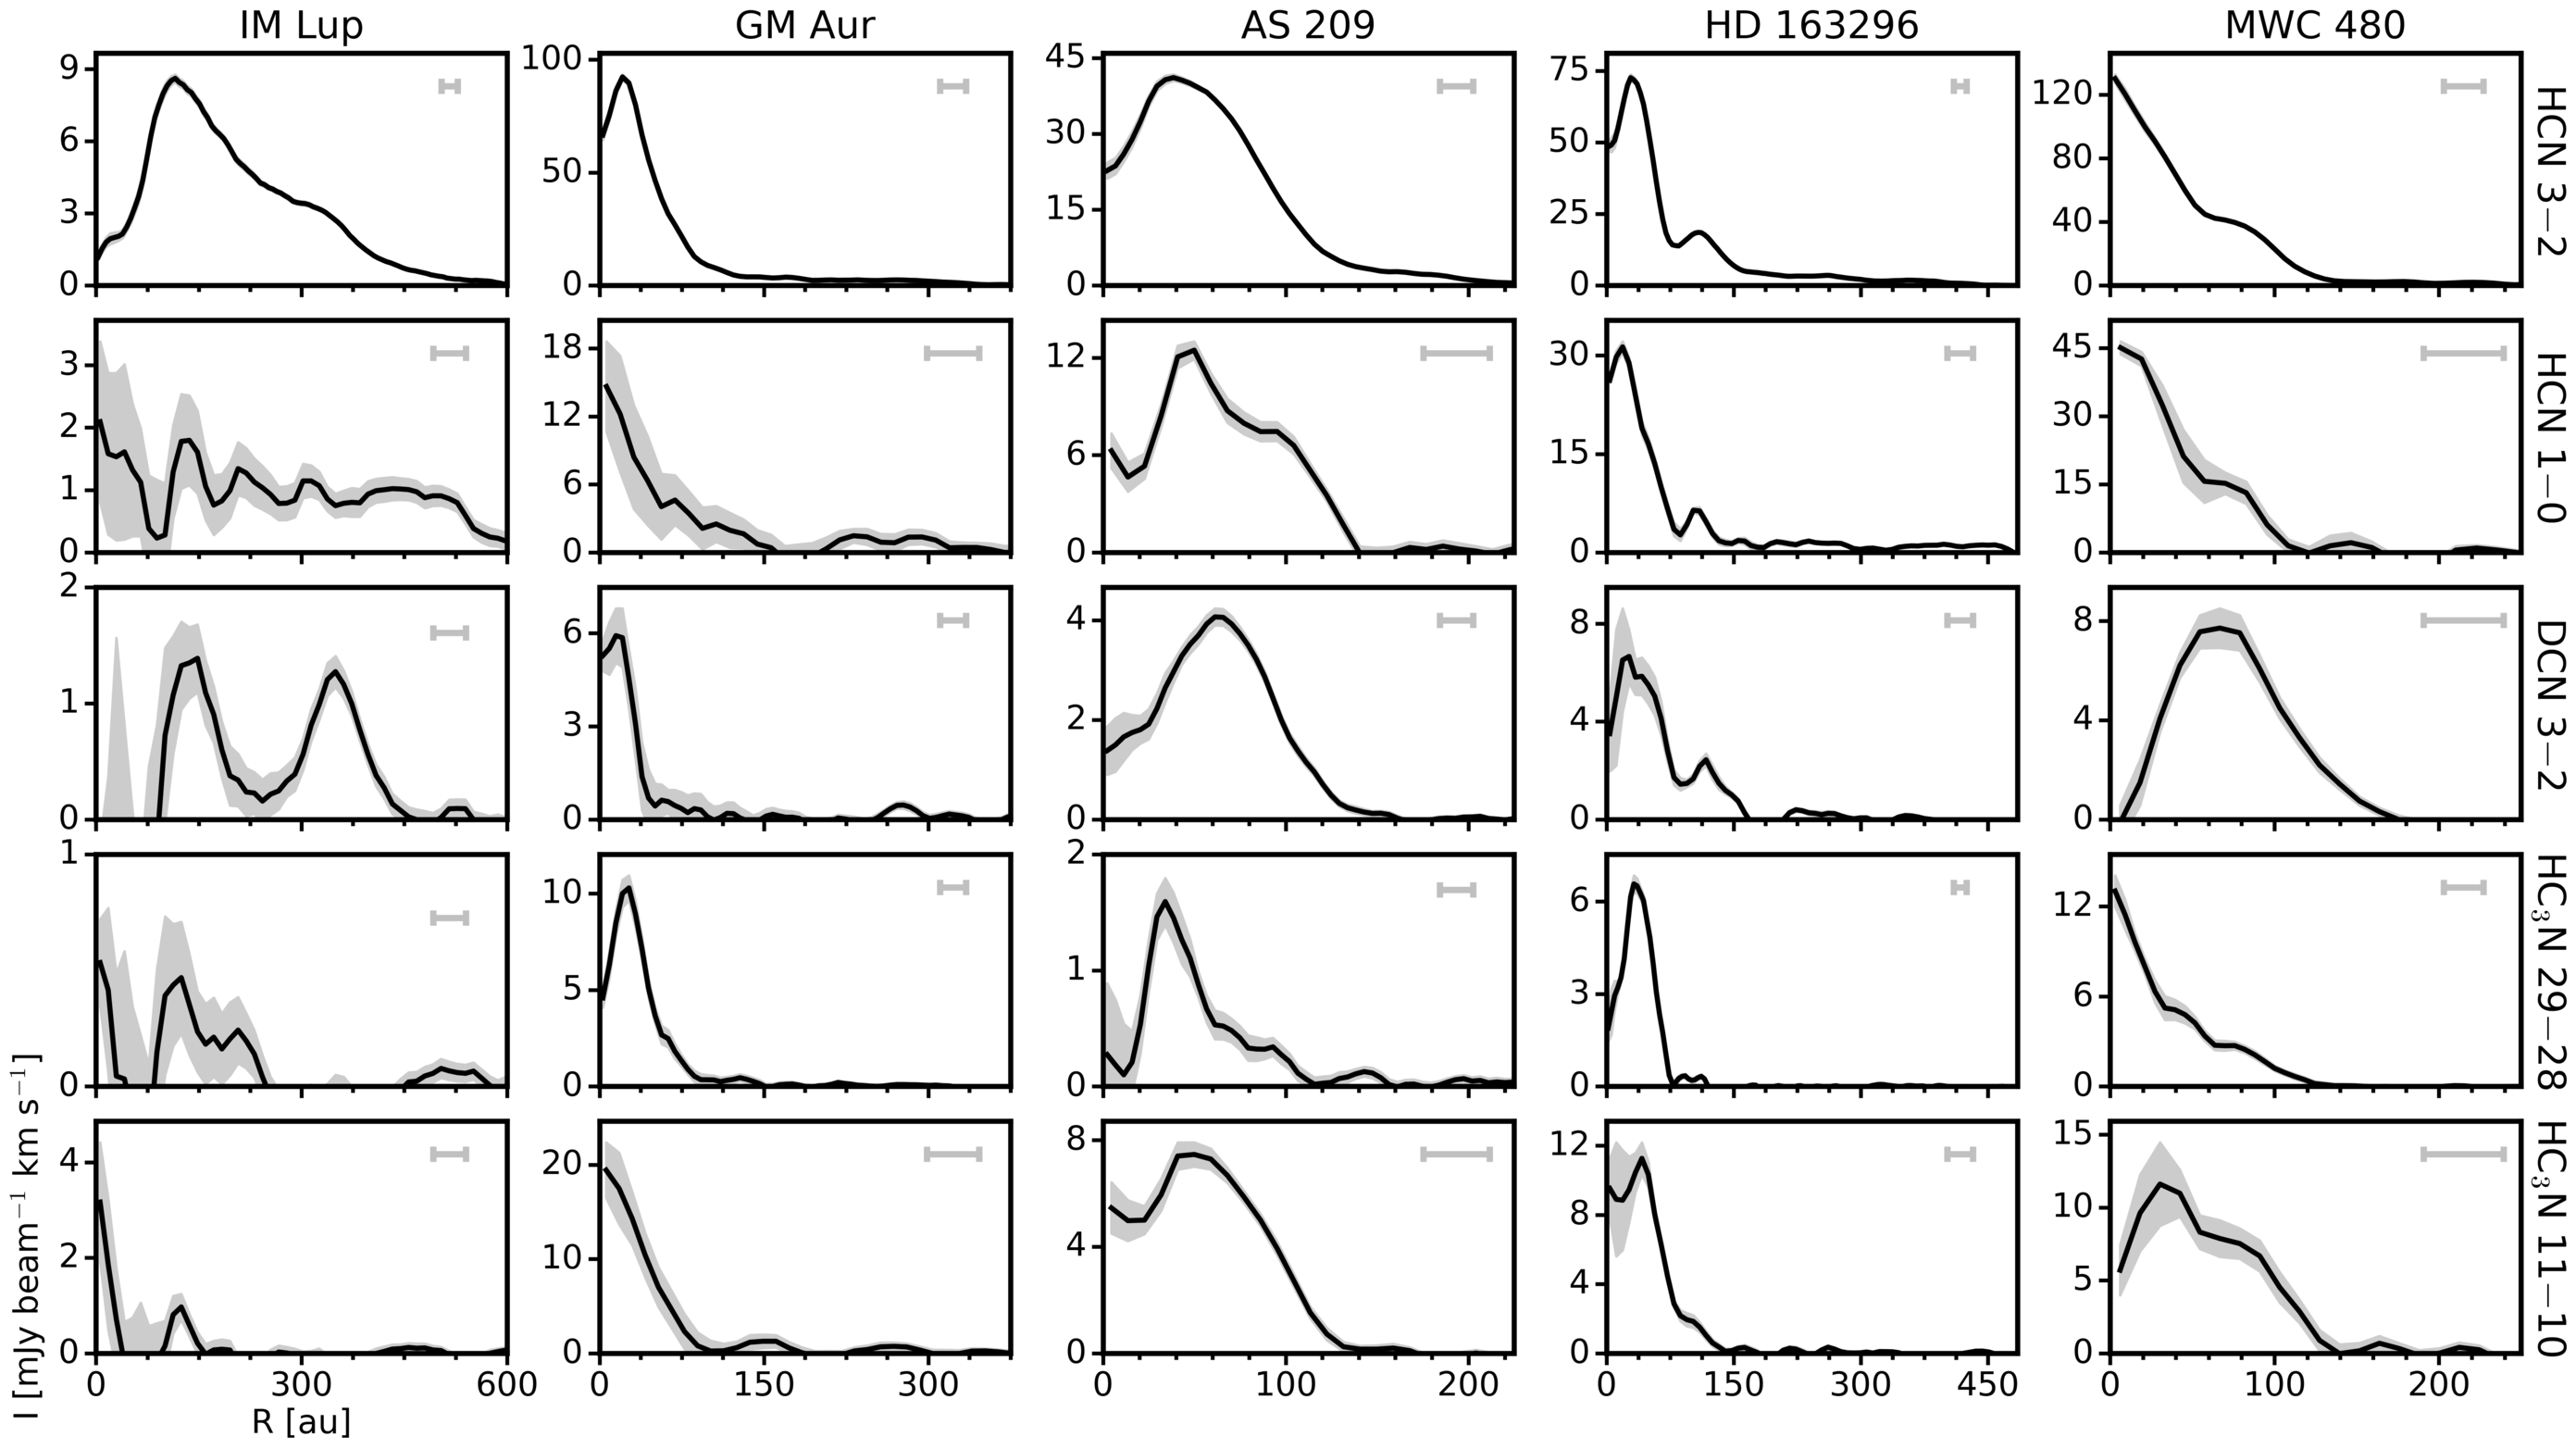 A representative set of radial line intensity profiles for some N-bearing molecules in the MAPS protoplanetary disks.